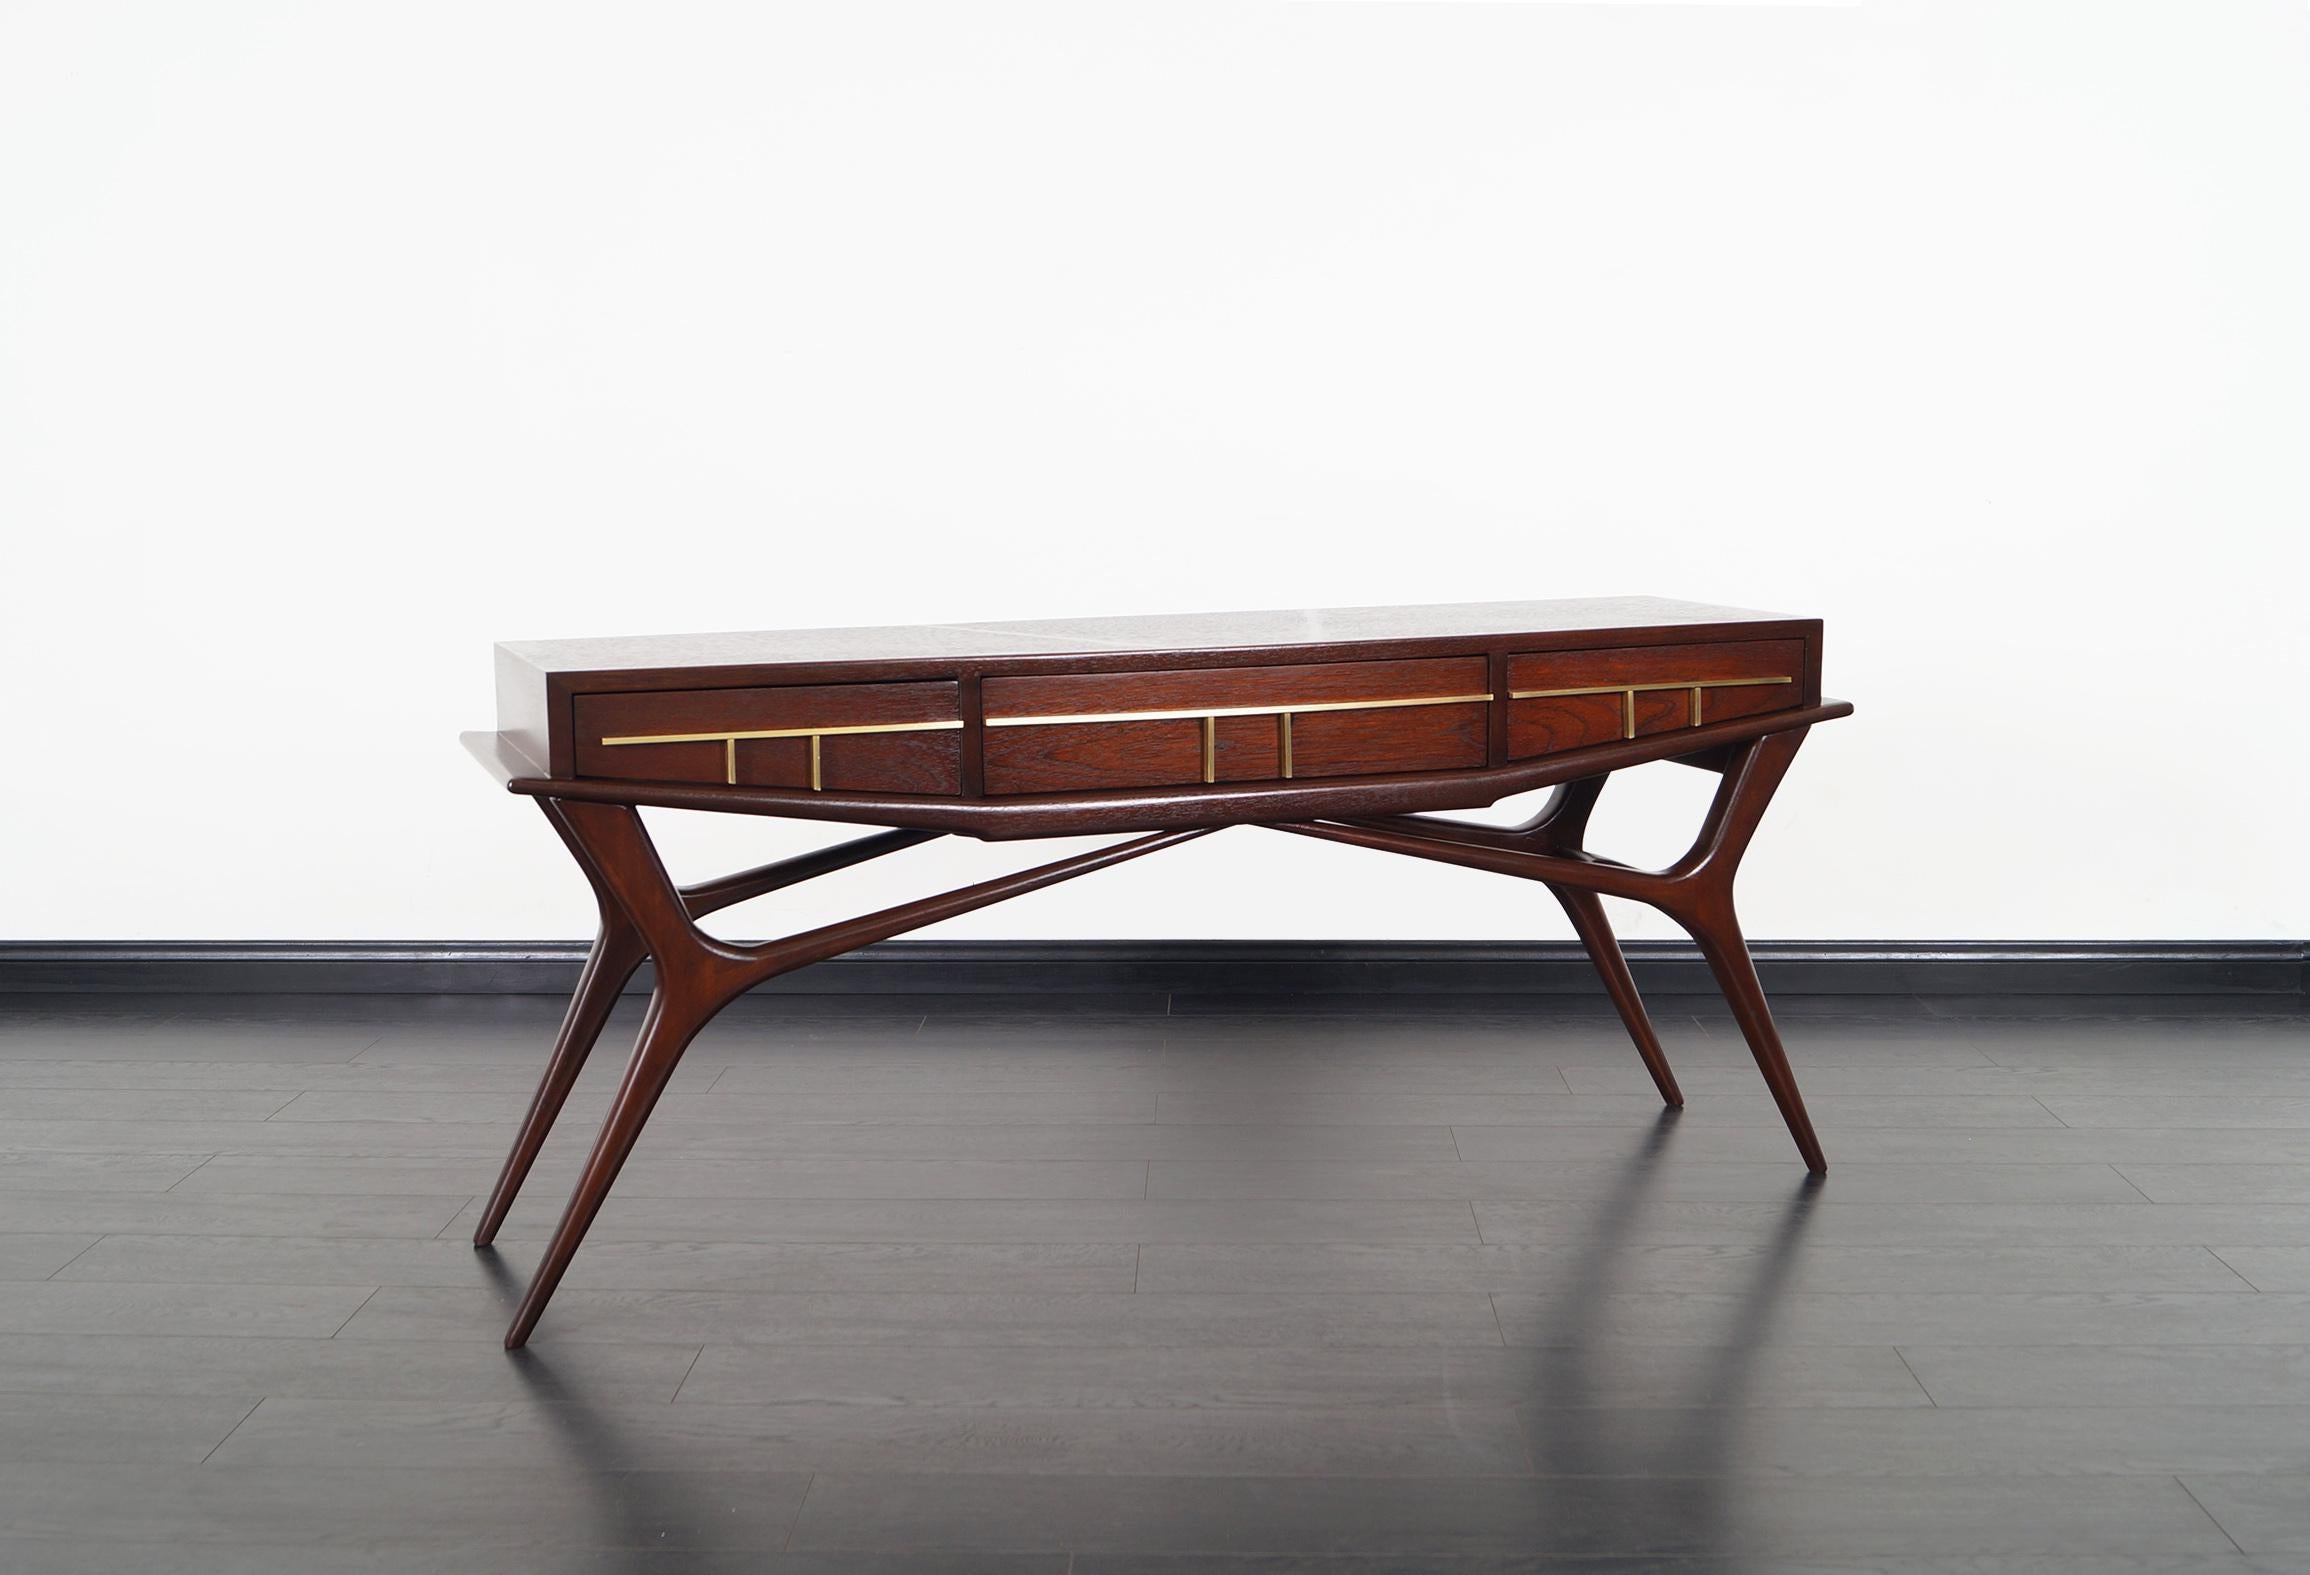 Stunning Mexican modernist console table designed by Frank Kyle. This phenomenal console table is simply amazing! Features three pull-out drawers with solid brass hardware.